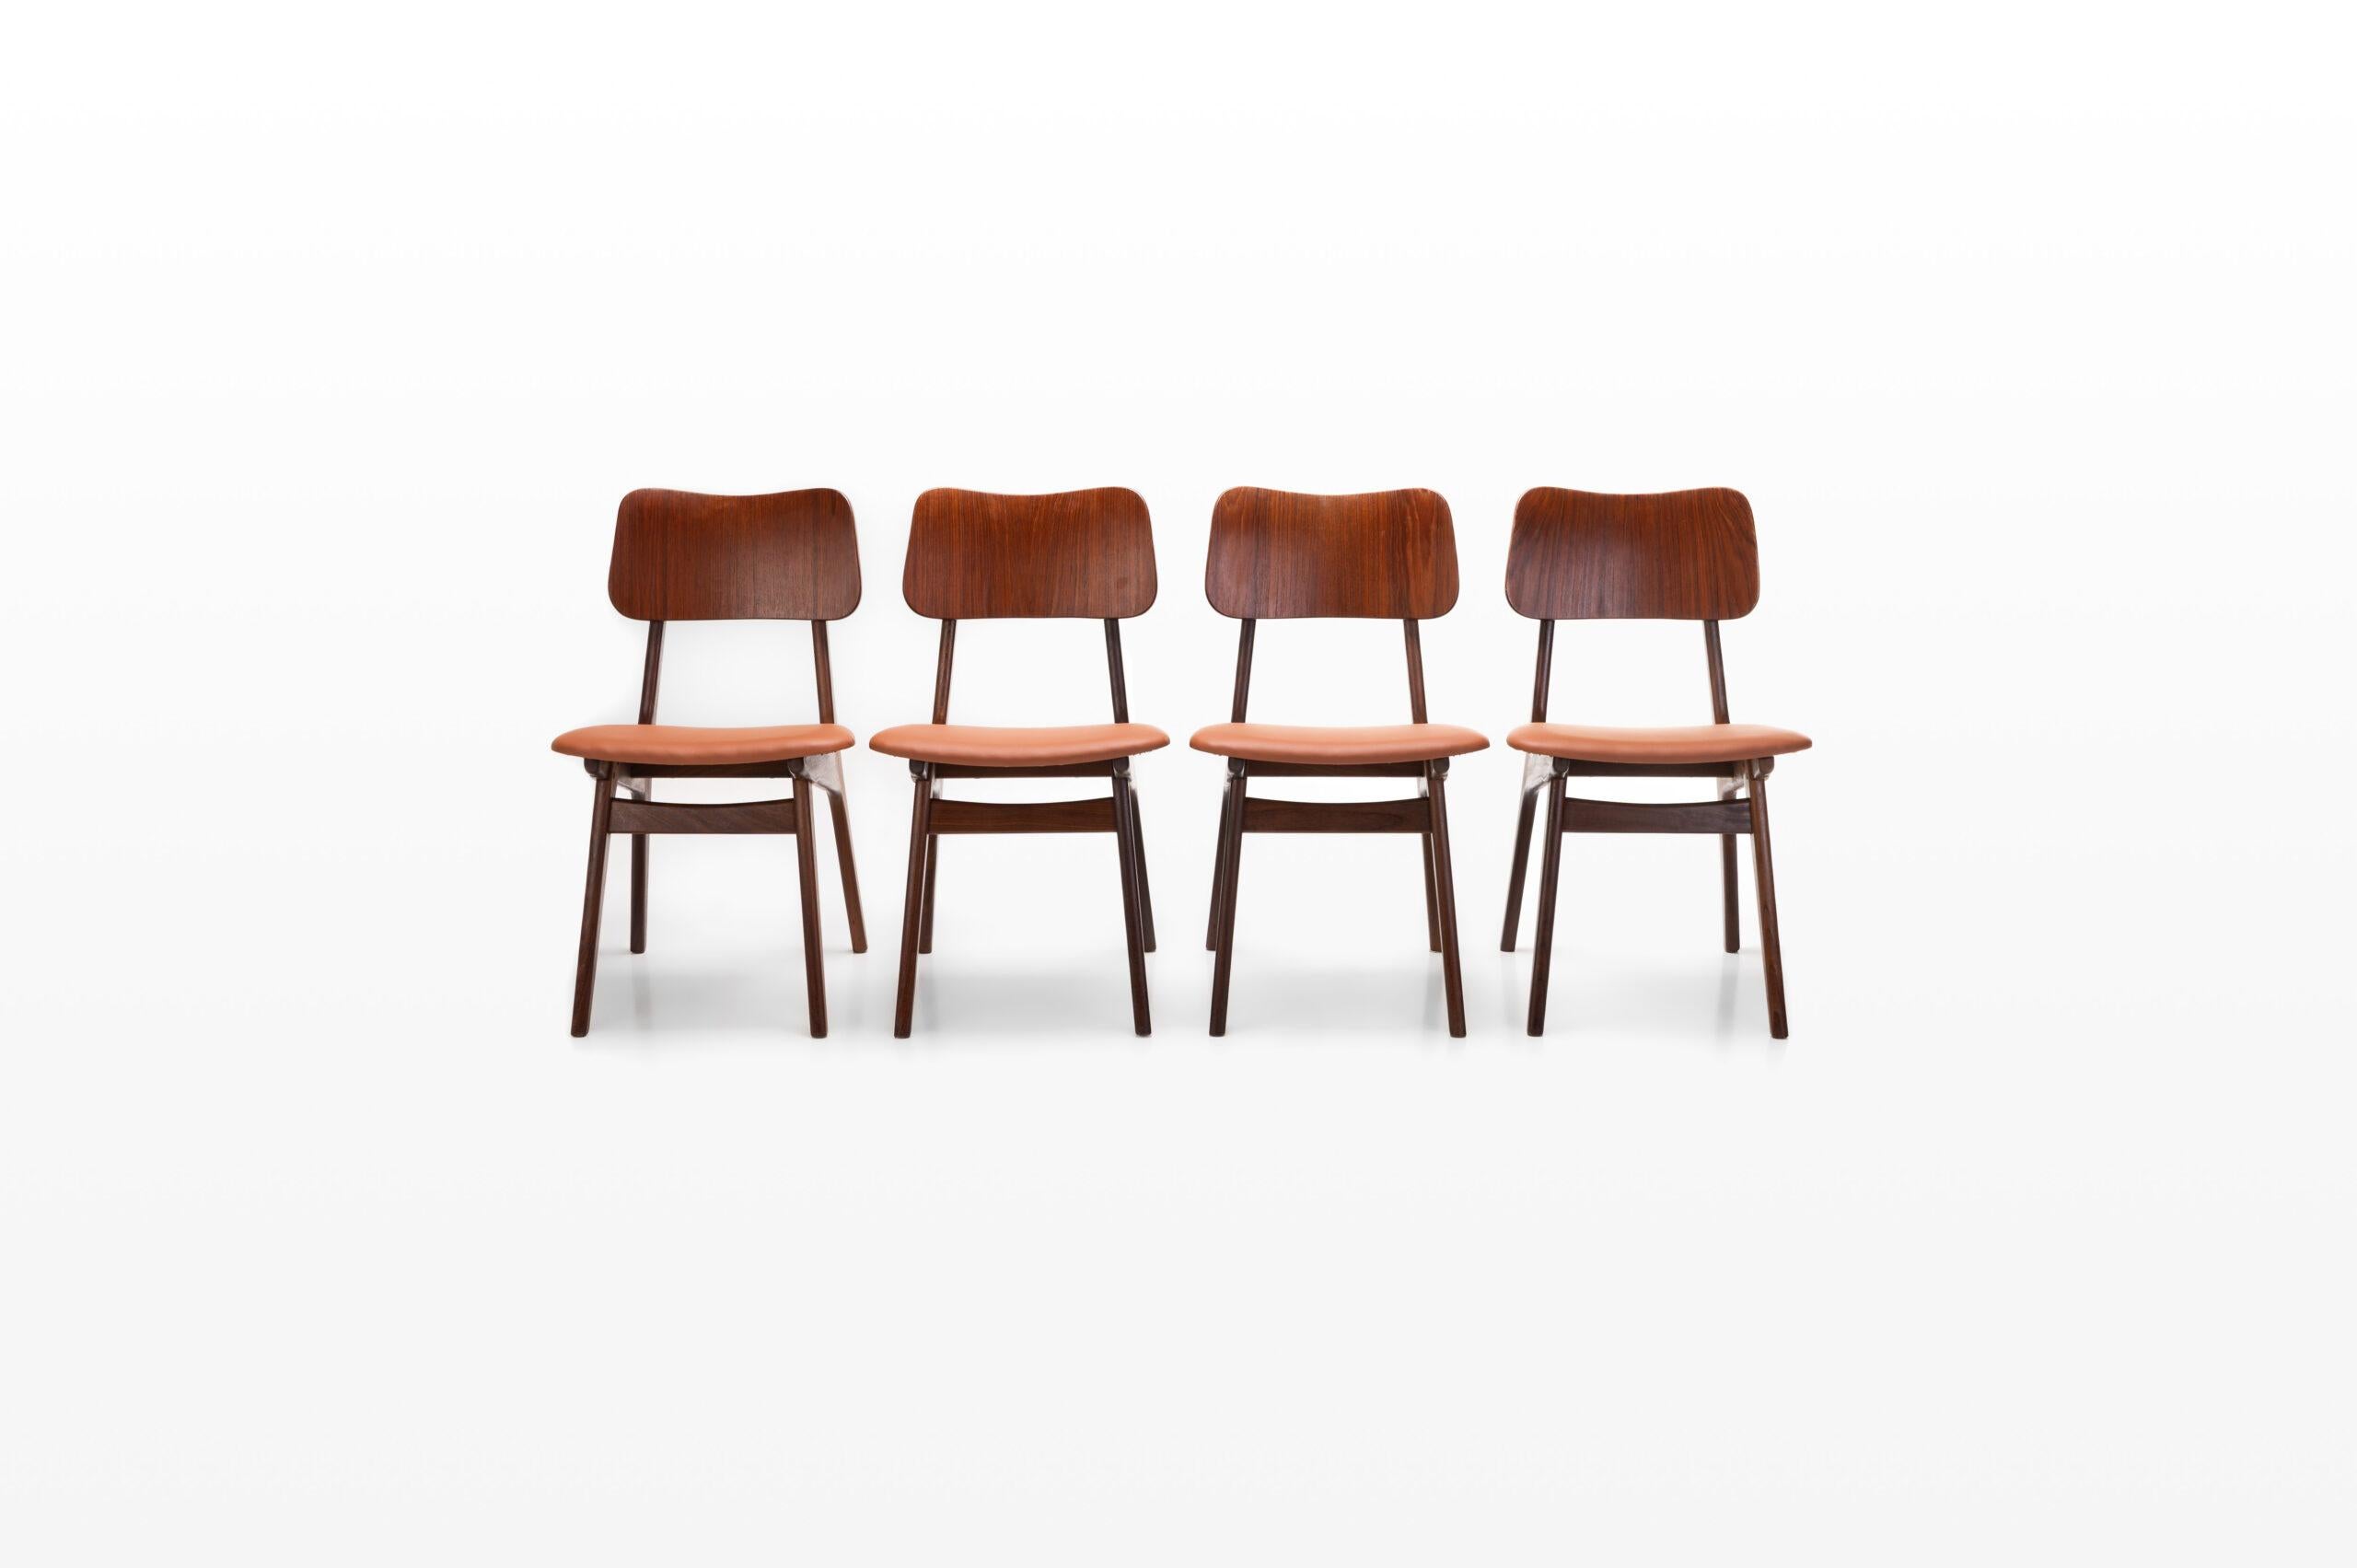 Set of four vintage dining chairs by Louis van Teeffelen for Wébé. The chairs have a teak frame and nice brass details. In very good condition and the seats are reupholstered in a cognac brown leatherette.
 